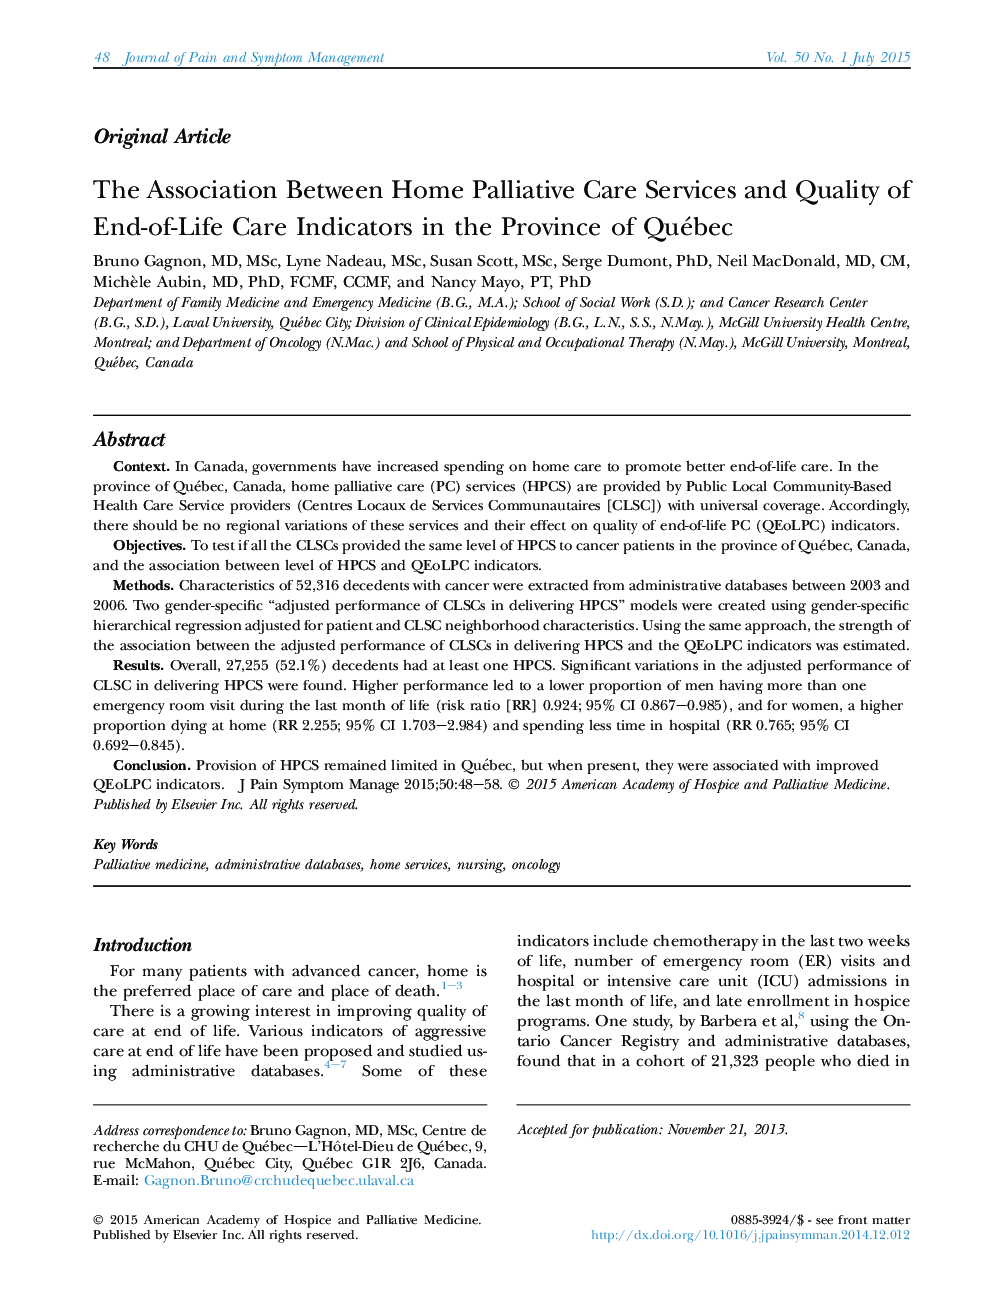 The Association Between Home Palliative Care Services and Quality of End-of-Life Care Indicators in the Province of Québec